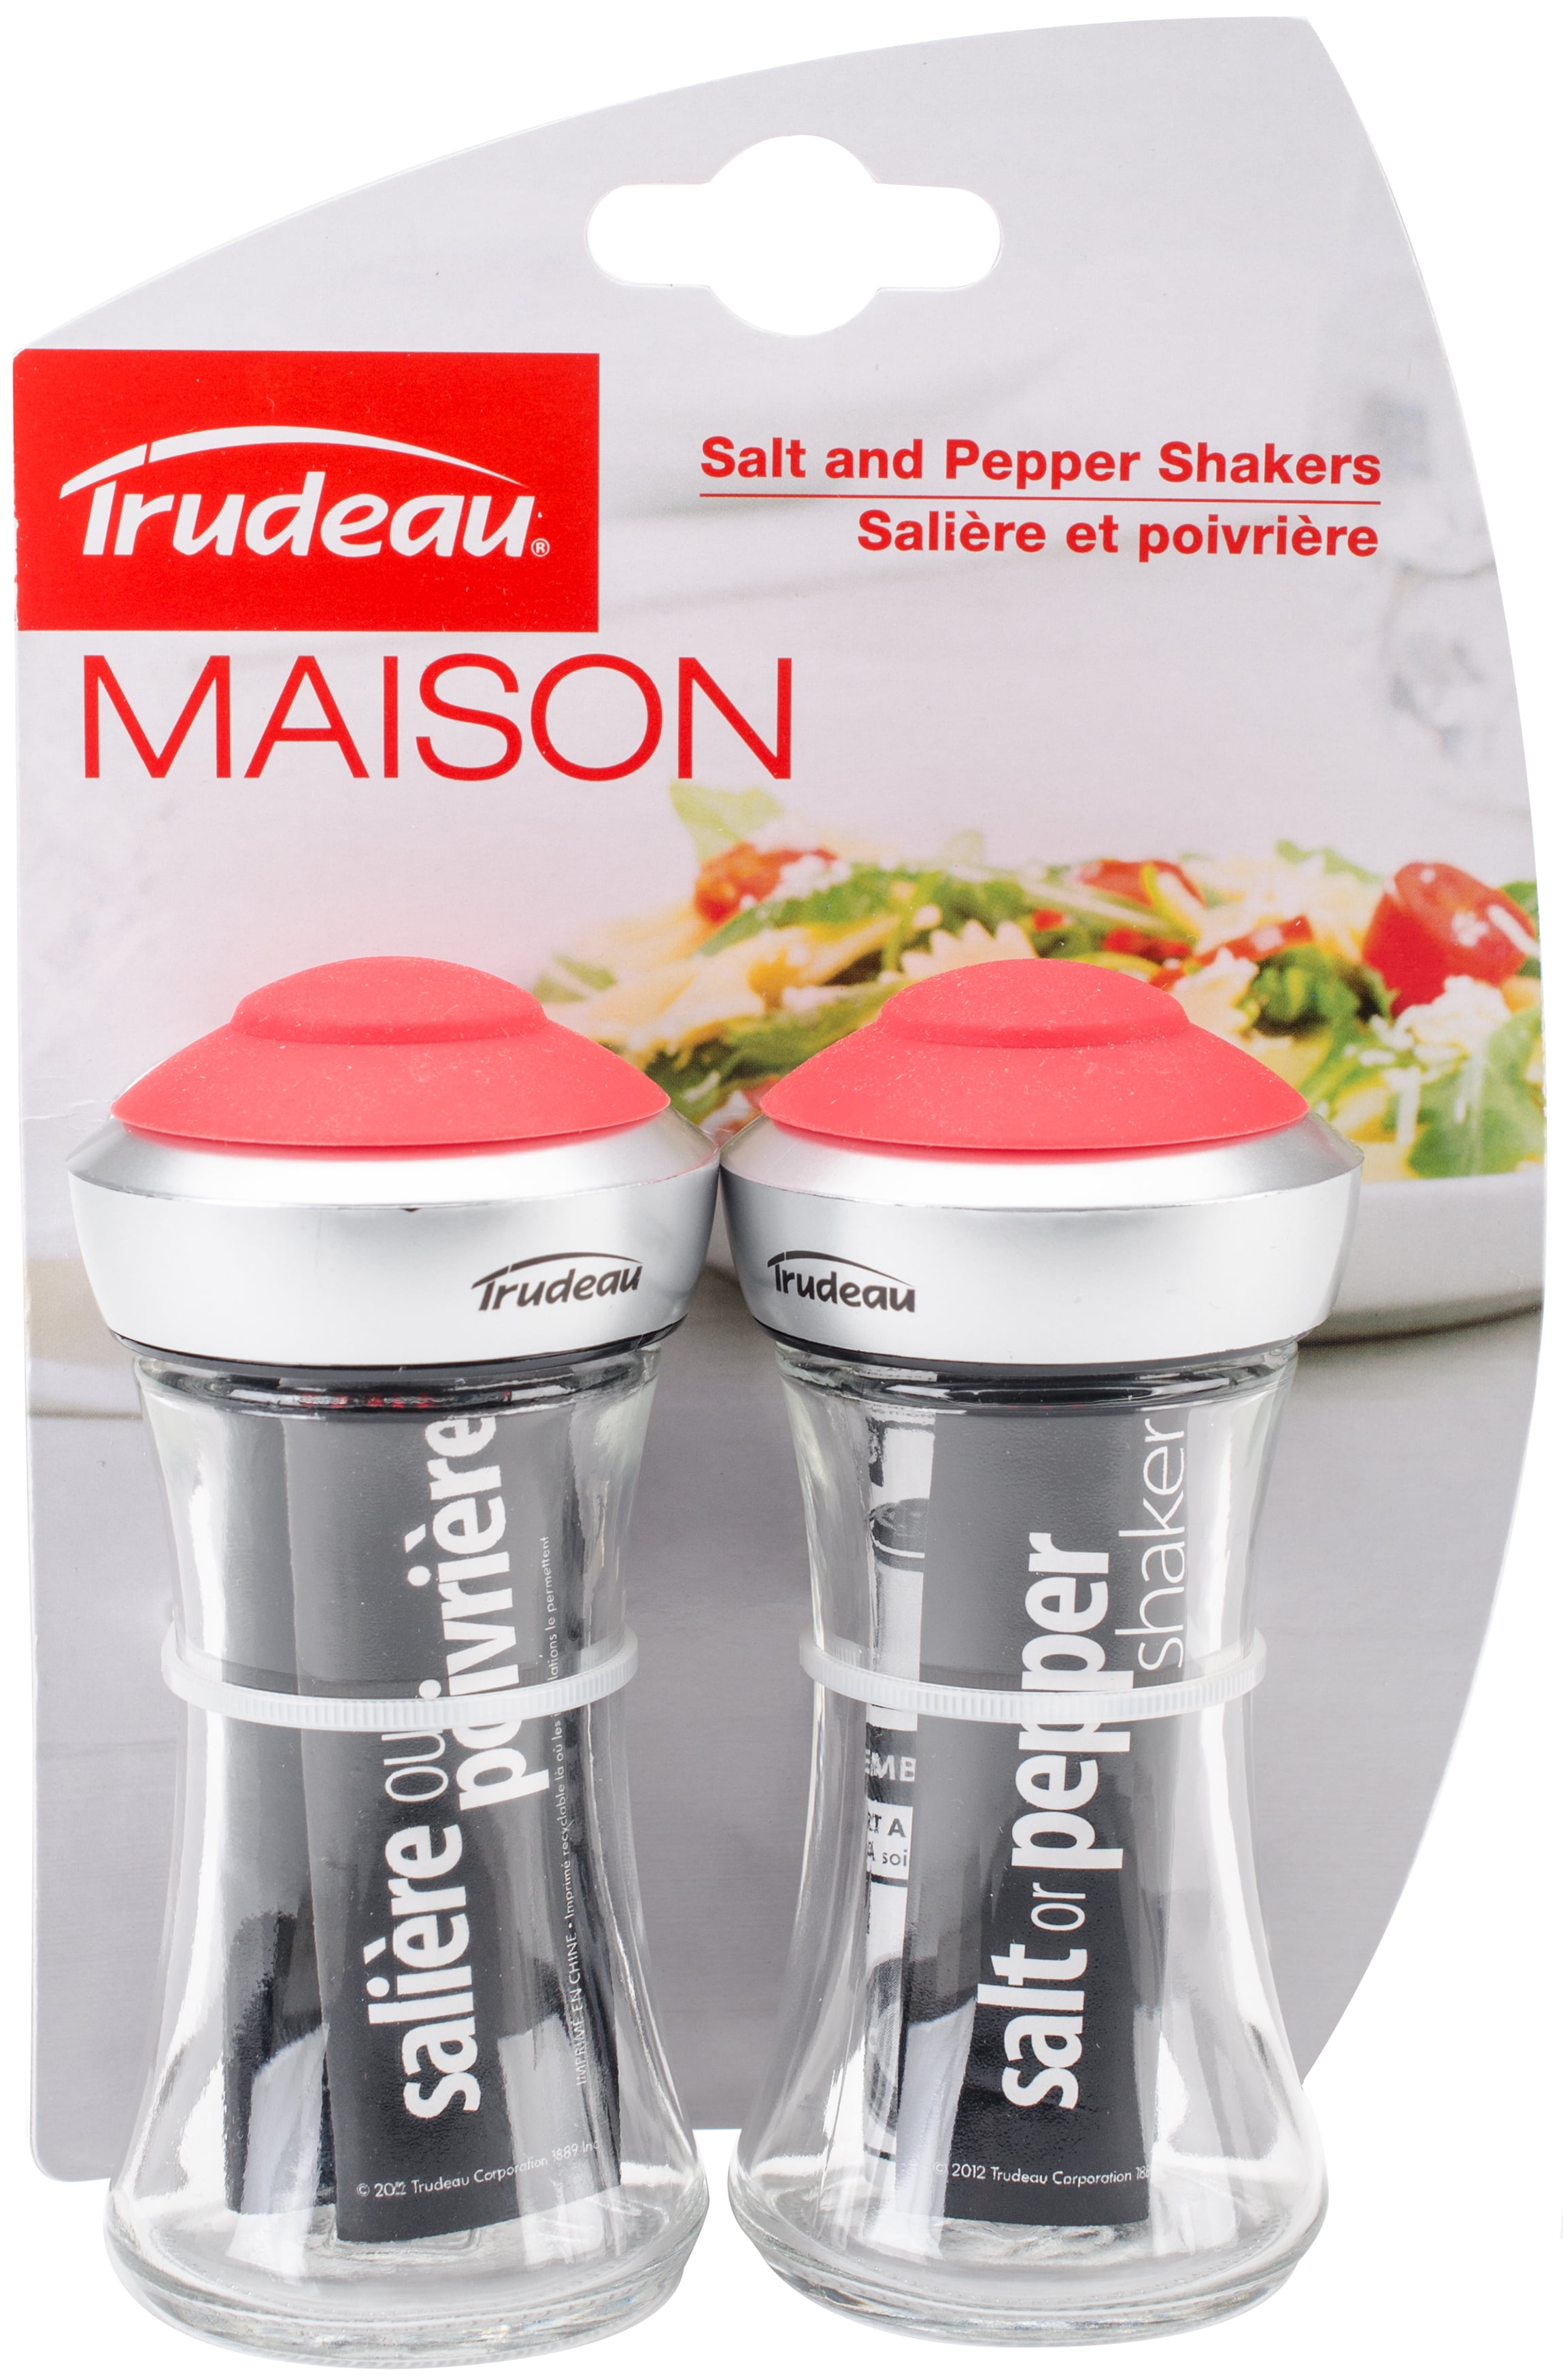 NEW Trudeau Pop Cheese Shaker Red